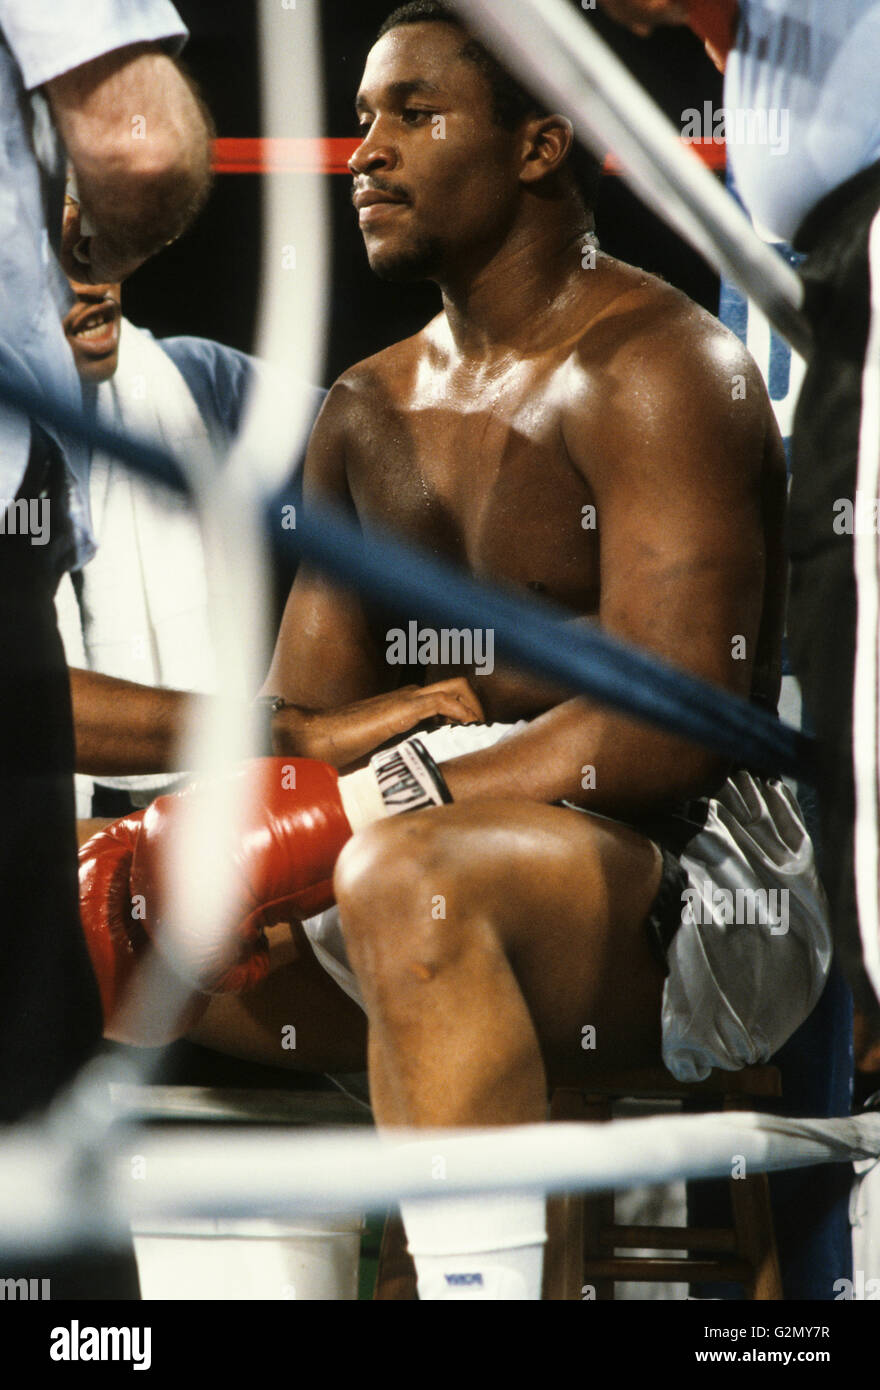 Larry Holmes wins against Witherspoon,the 80s Stock Photo